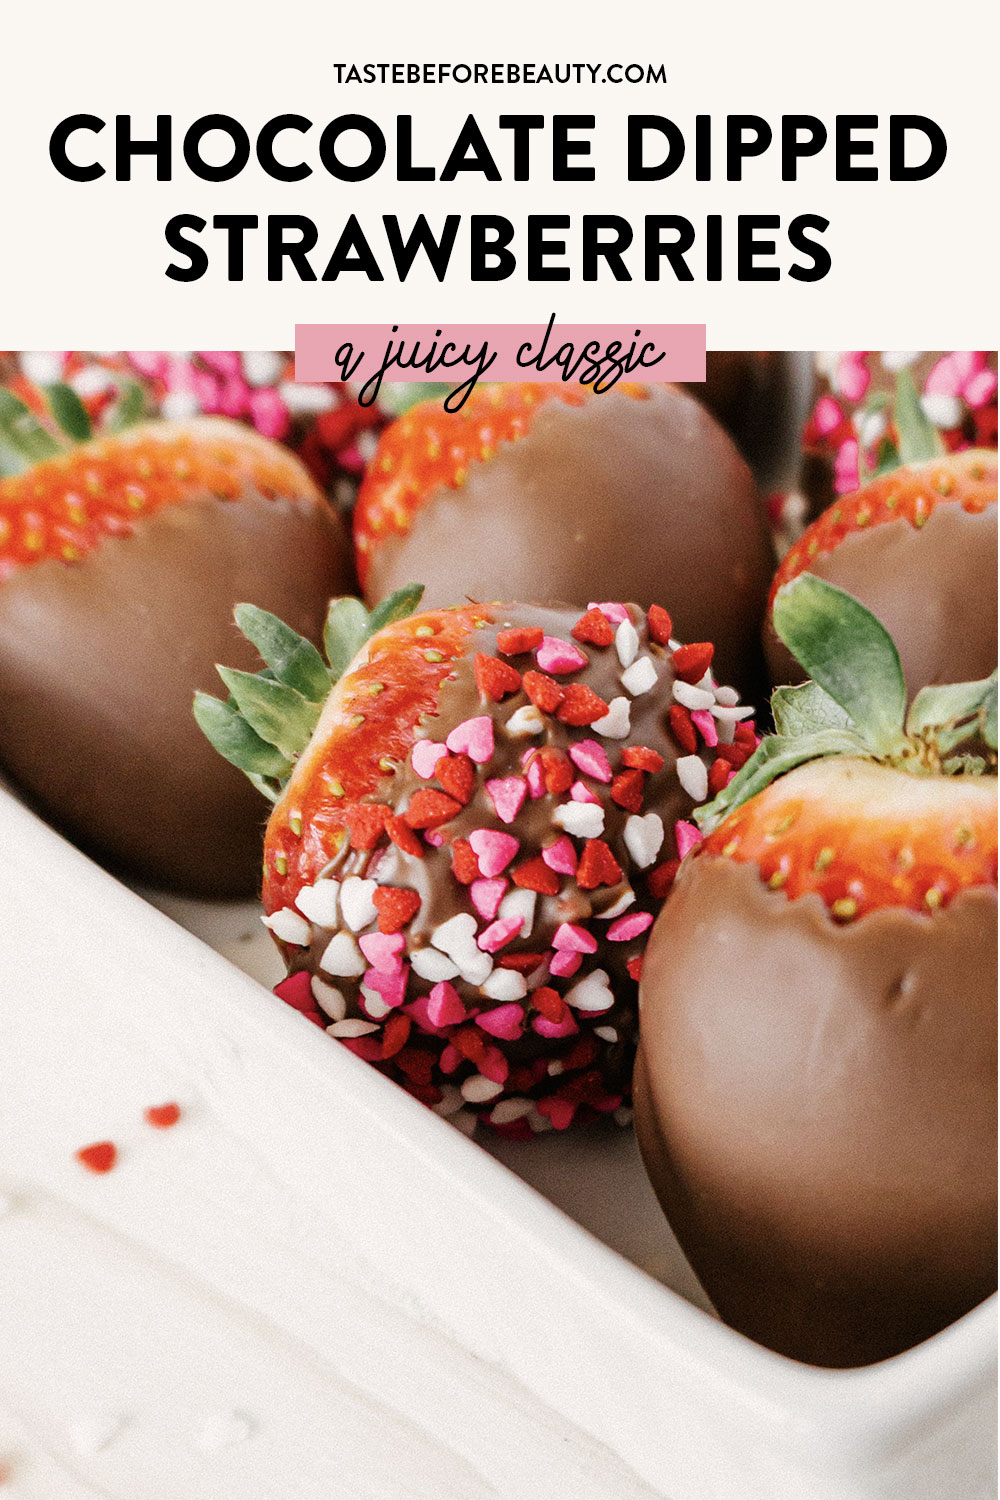 taste before beauty chocolate dipped strawberries with sprinkles pinterest pin